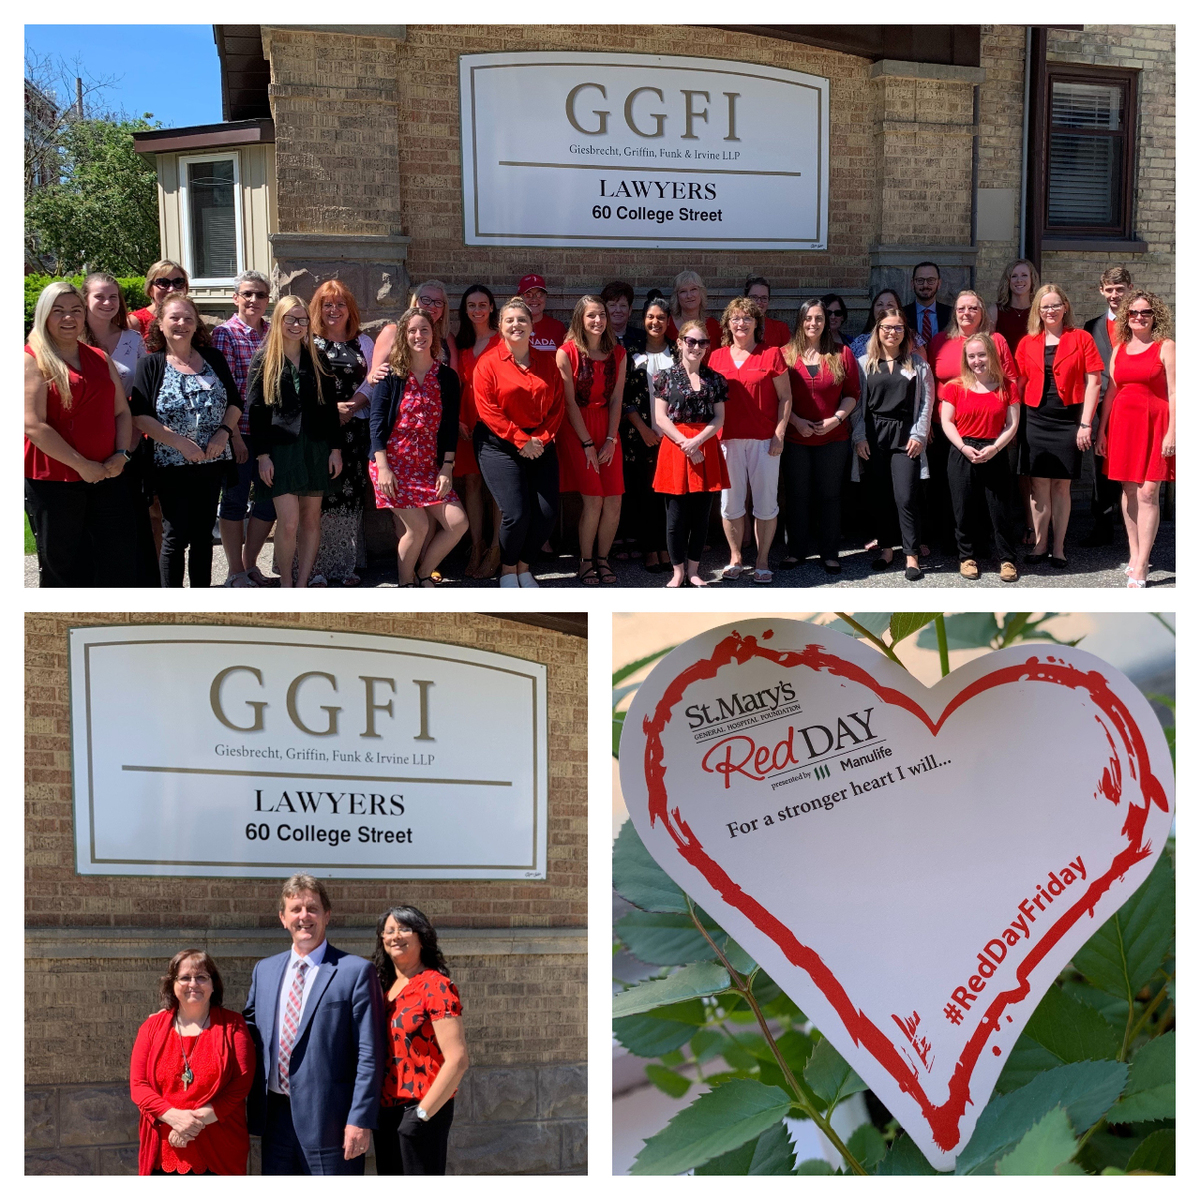 Three images of the GGFI team participating in St. Mary's RedDay